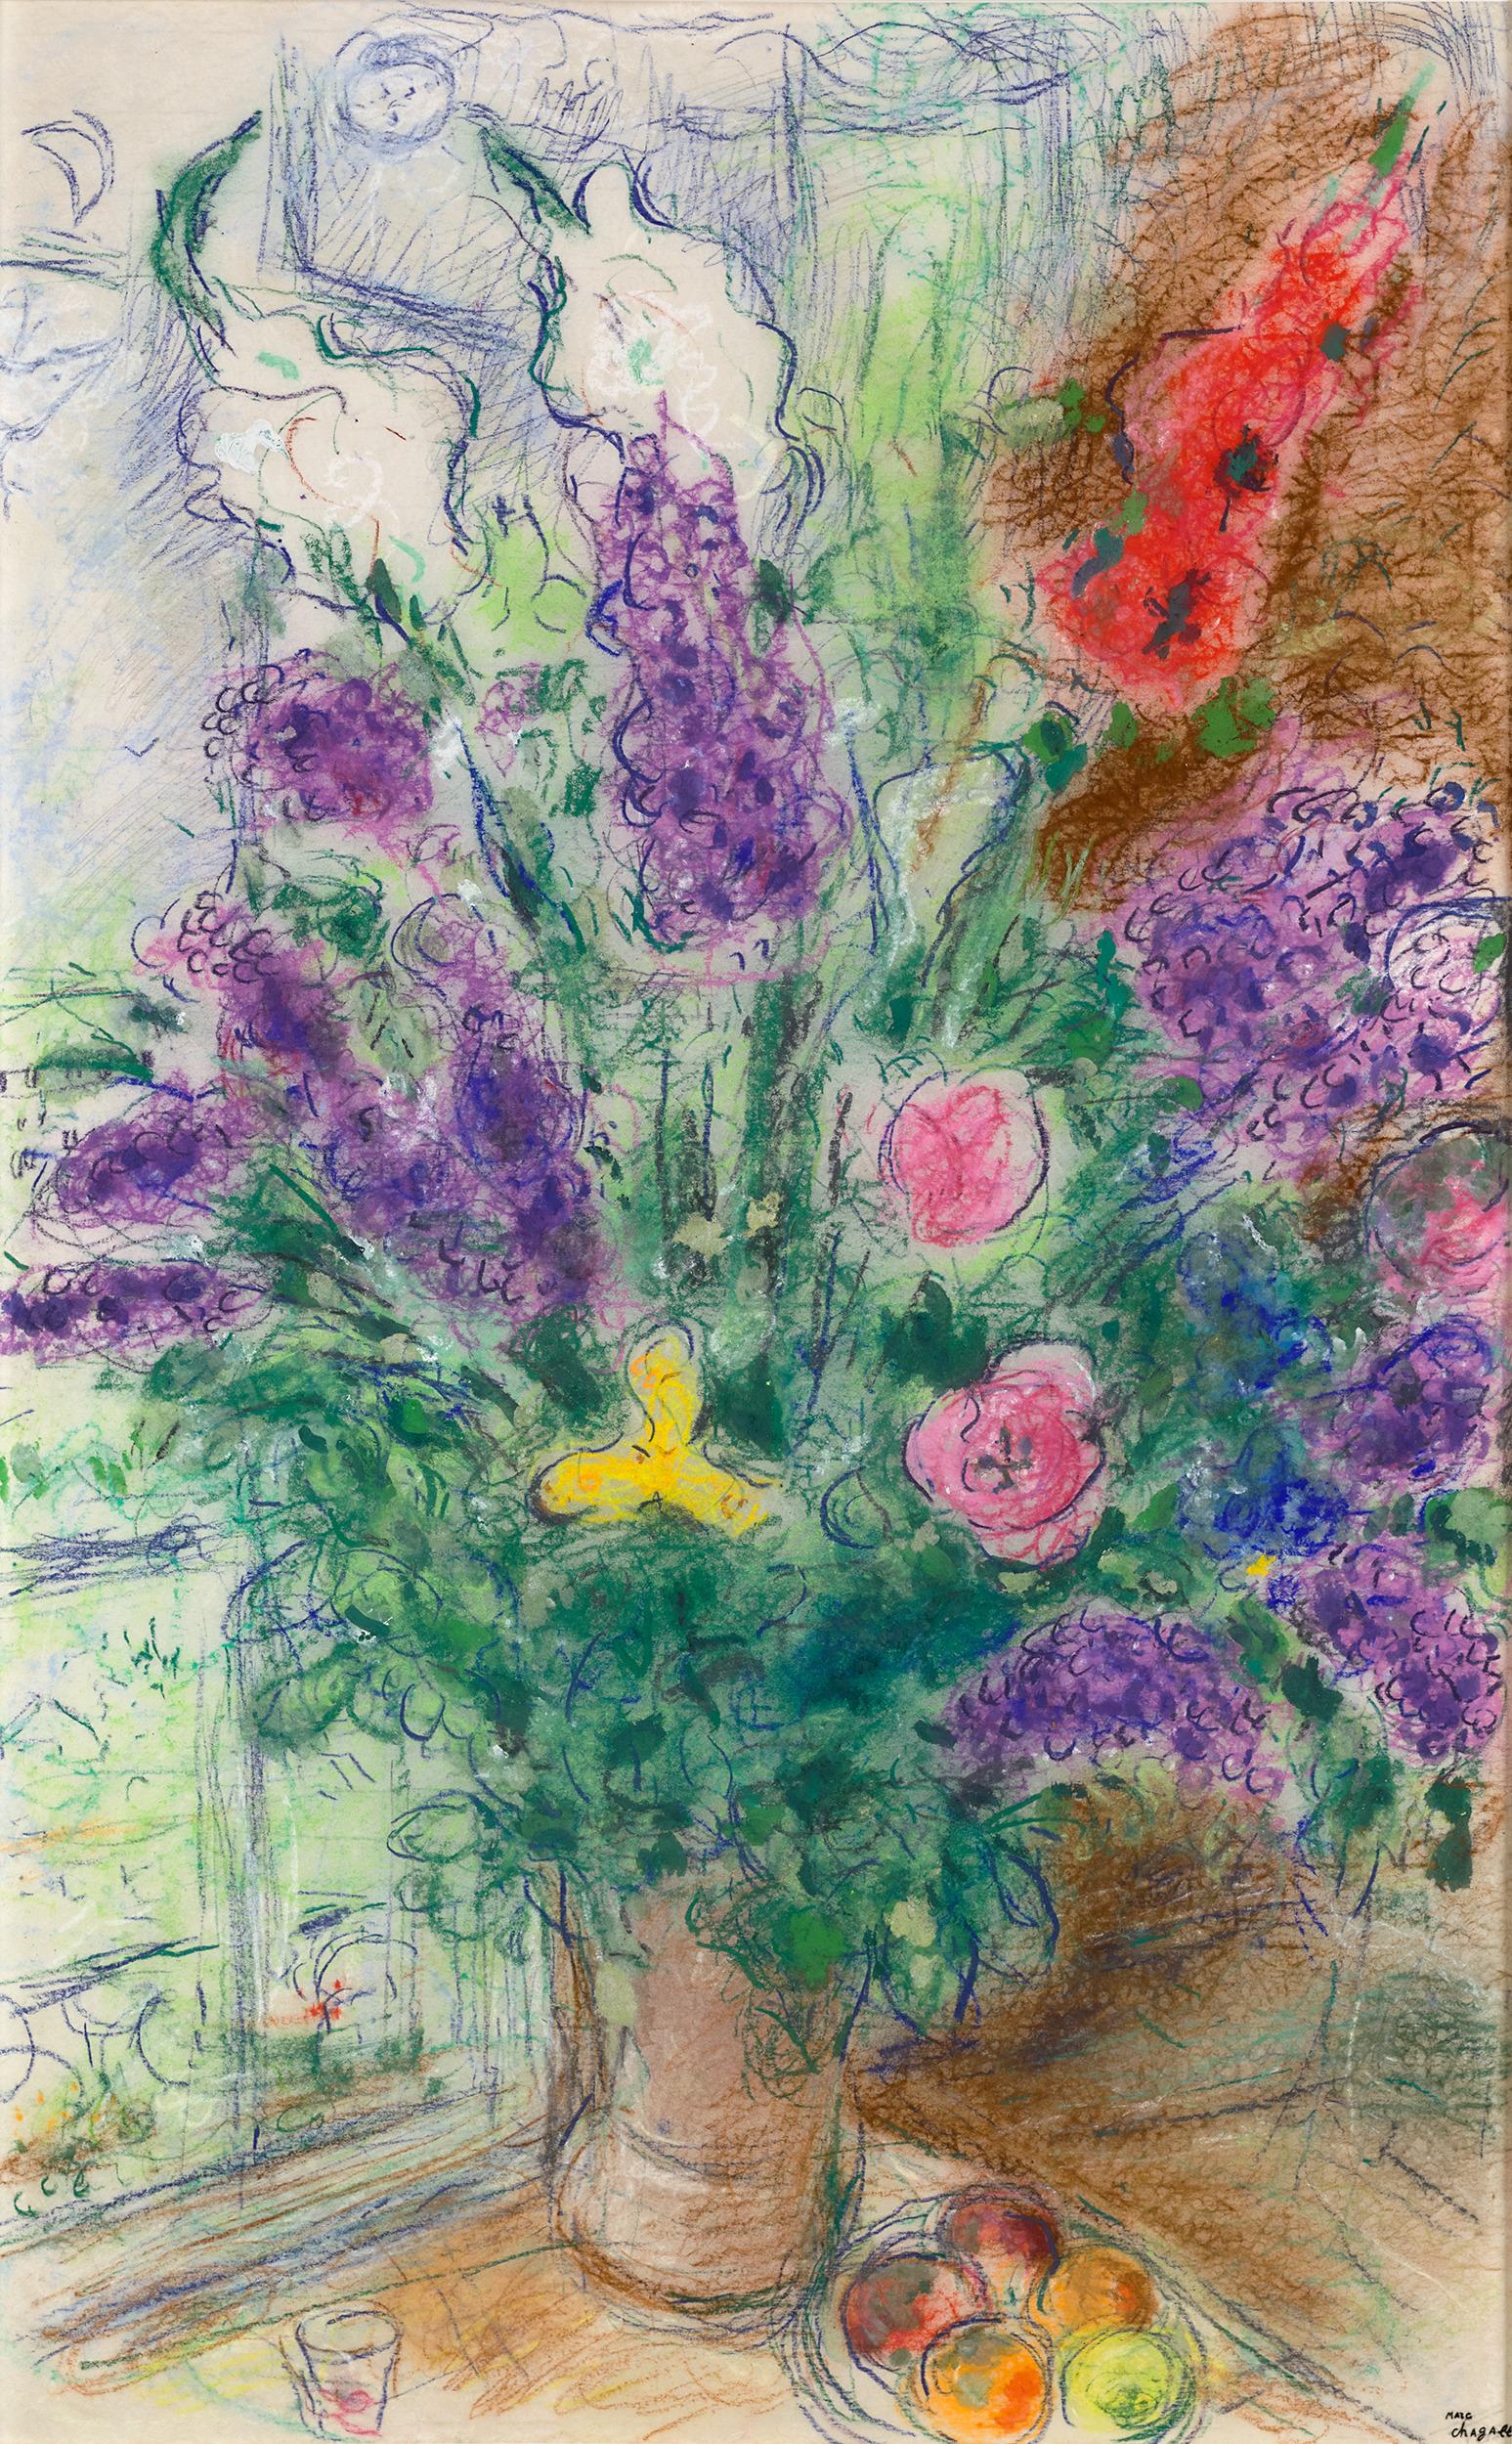 Marc Chagall
1887-1985  Russian

Grand bouquet et fruits devant la fenêtre à Paris
(Large bouquet and fruits in front of the window in Paris)

Stamped with signature “Marc Chagall" (lower right)

Pastel and gouache on Japan paper

“When Matisse